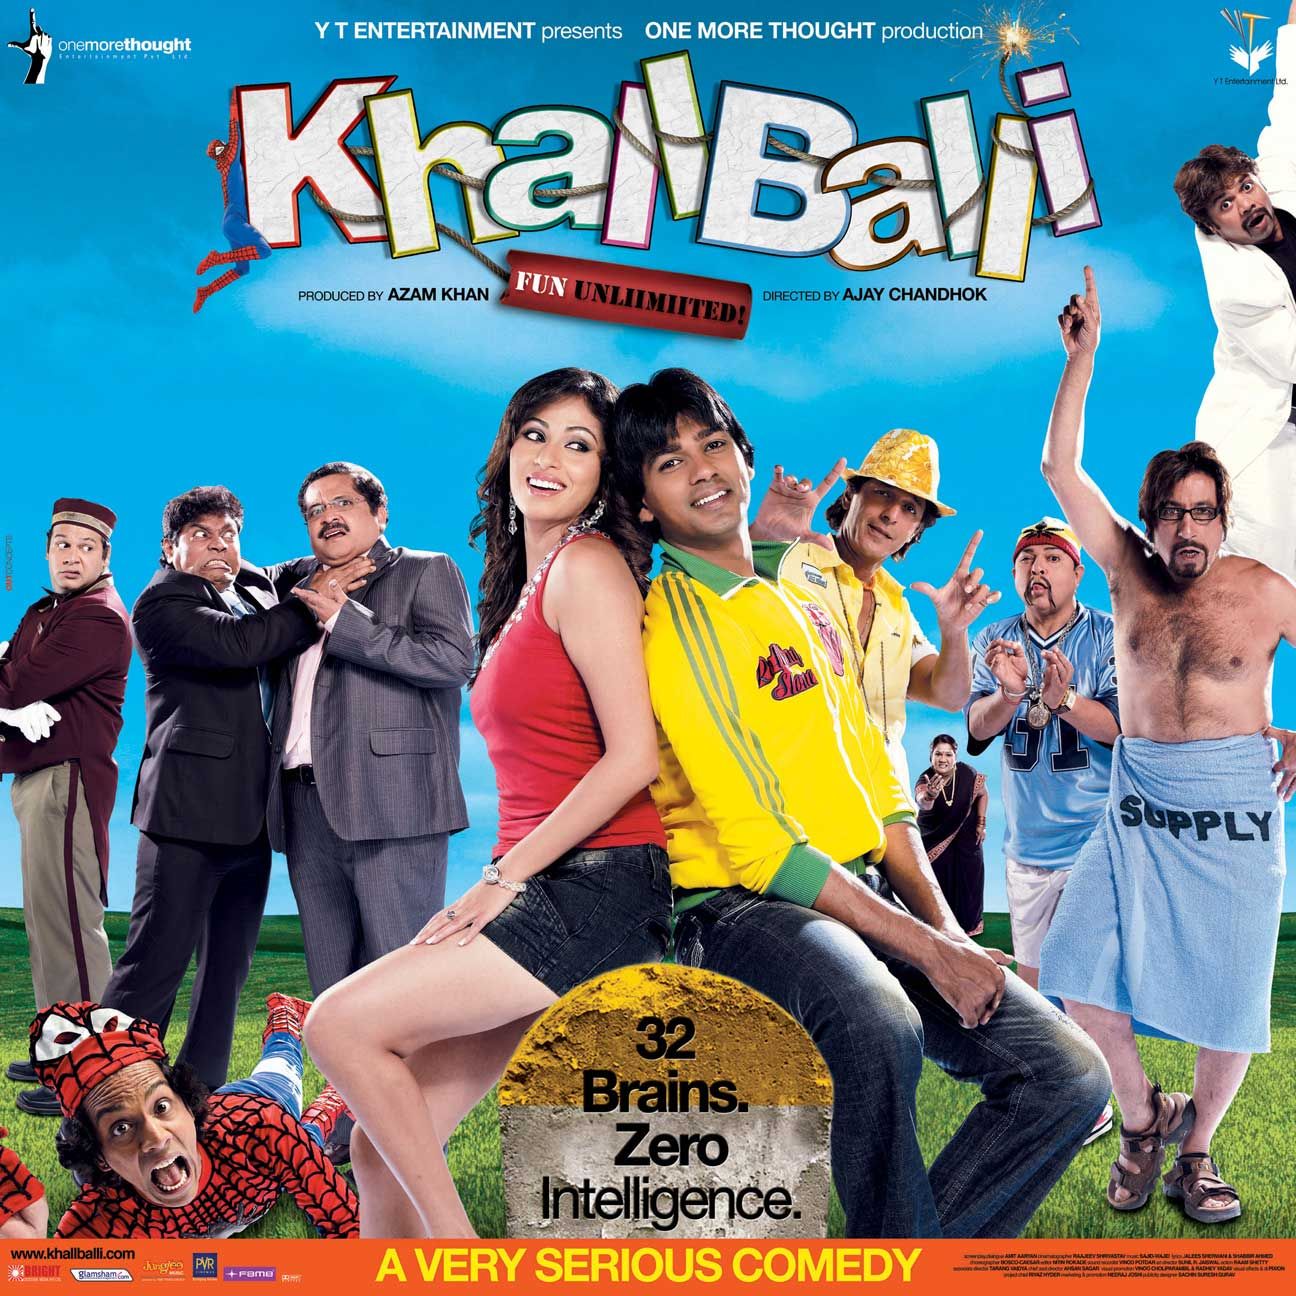 Extra Large Movie Poster Image for Khallballi: Fun Unlimited (#6 of 10)